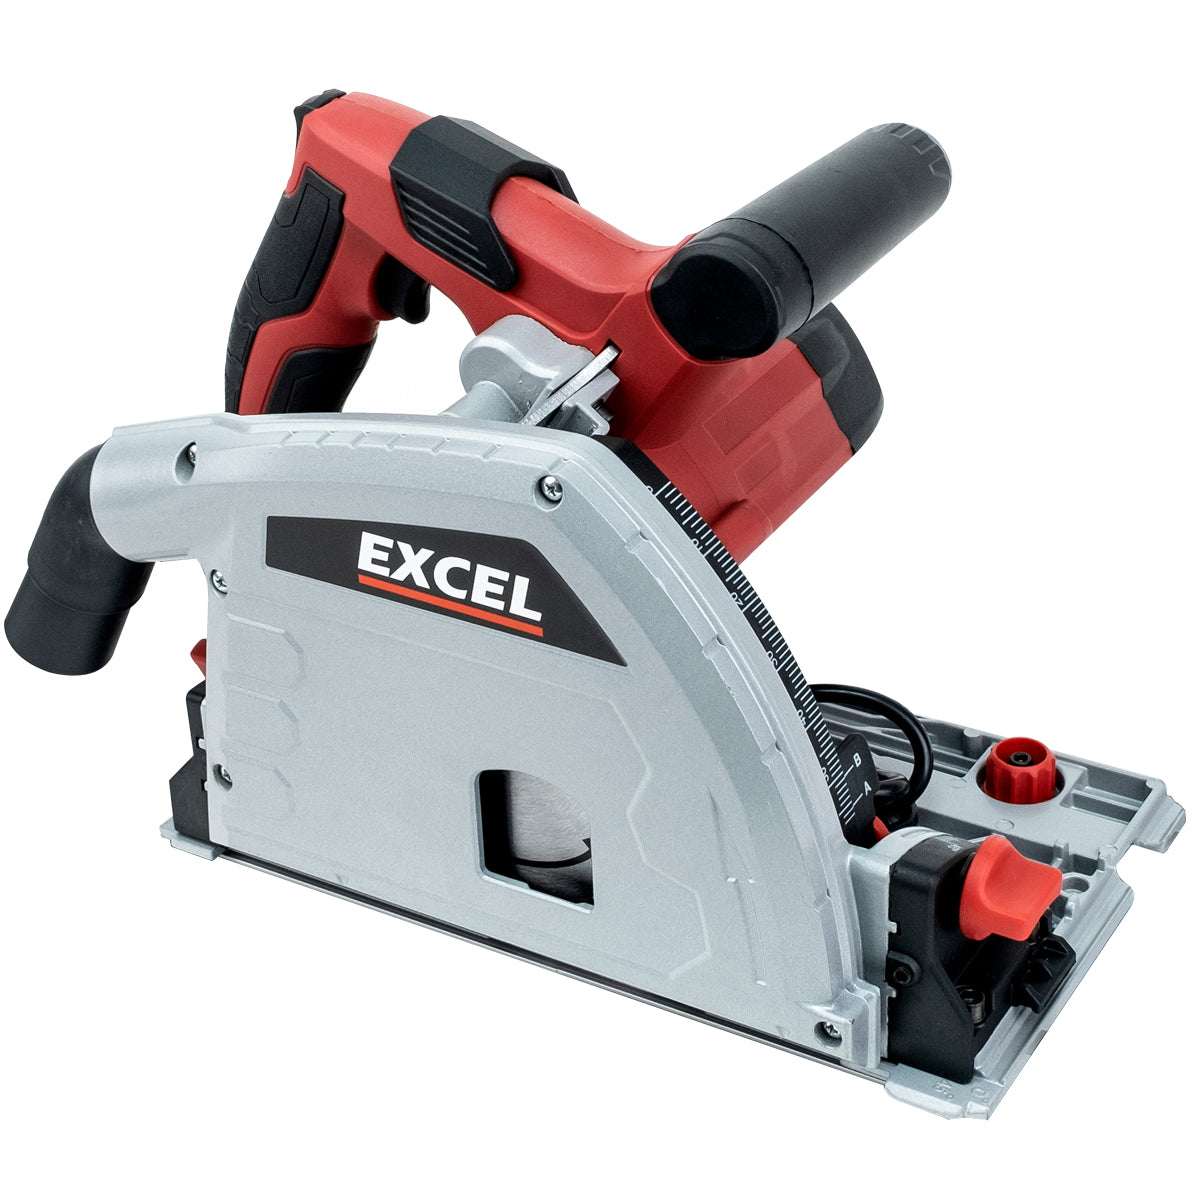 Excel 165mm Plunge Saw 1200W/240V with Guide Rails and Accessories Set